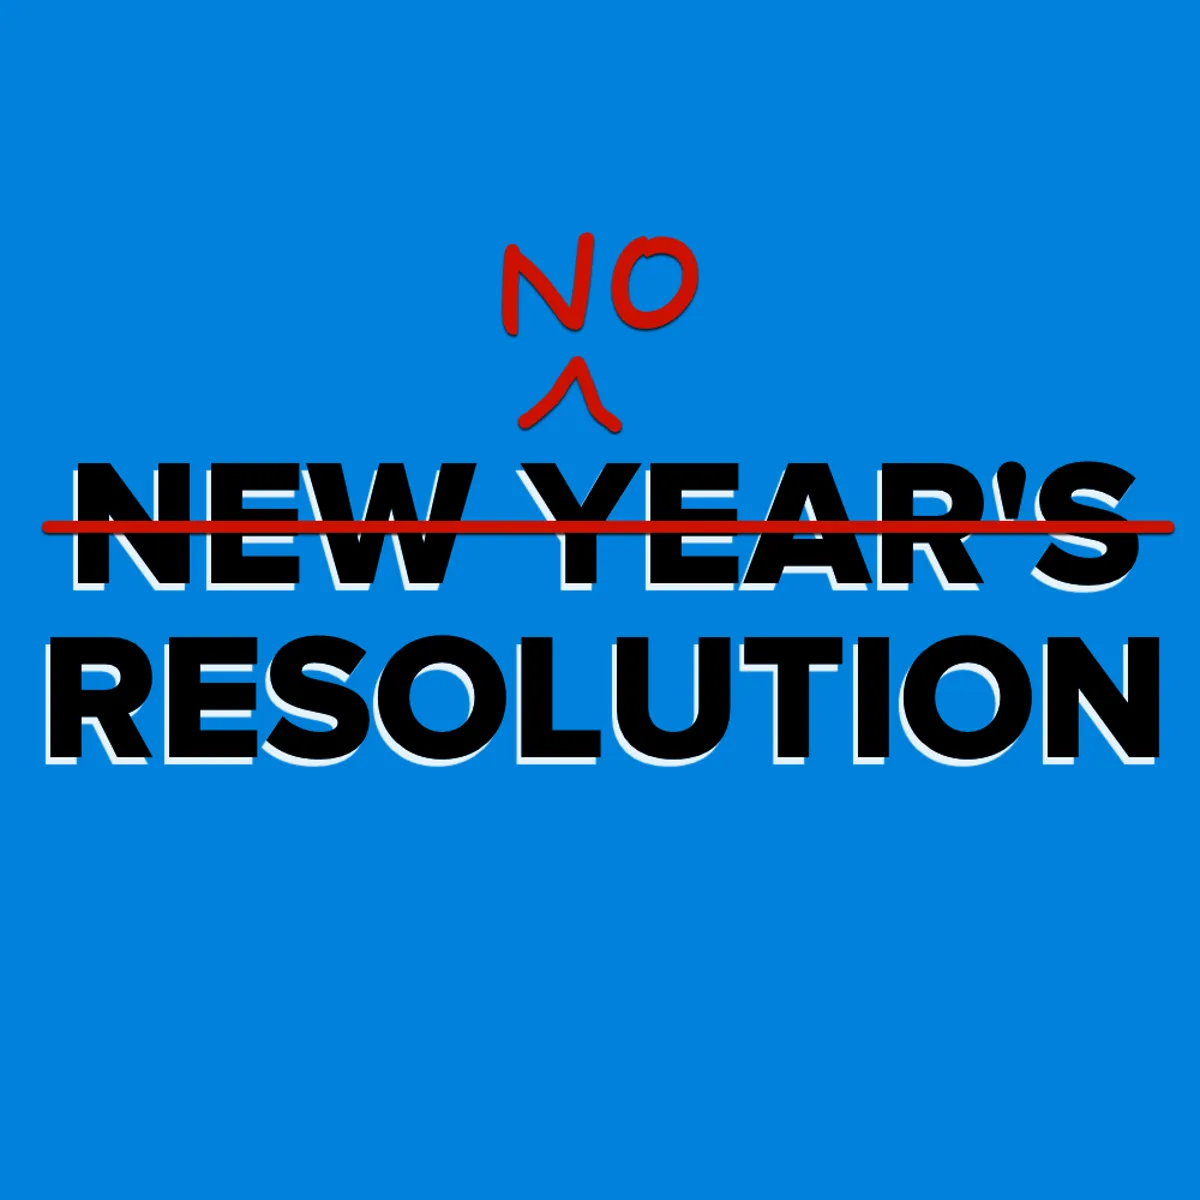 Although they’re a popular practice, New Year’s resolutions are often not very effective.